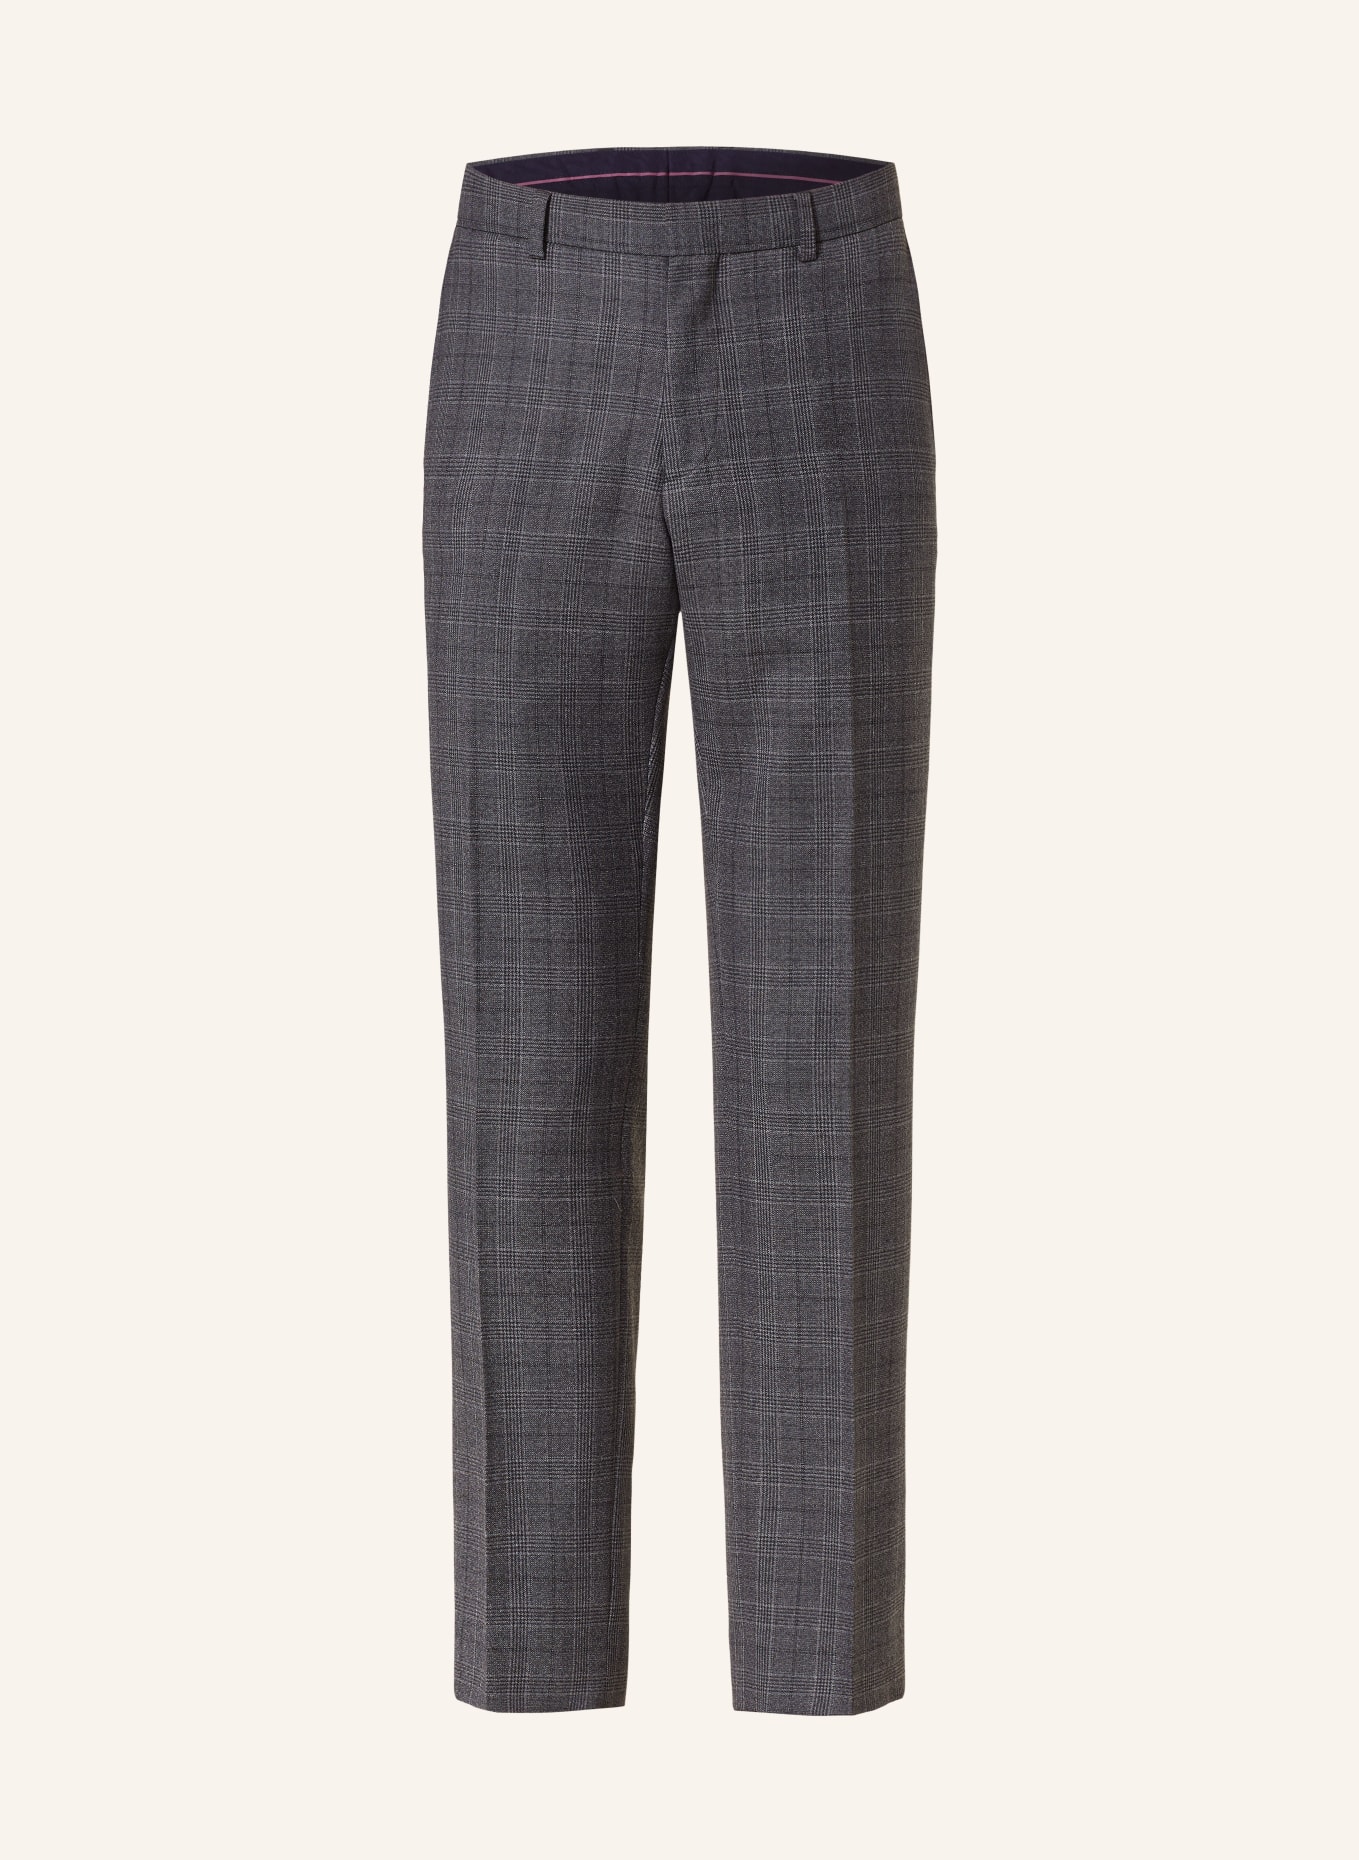 TED BAKER Anzughose ZIONST Slim Fit, Farbe: CHARCOAL CHARCOAL (Bild 1)